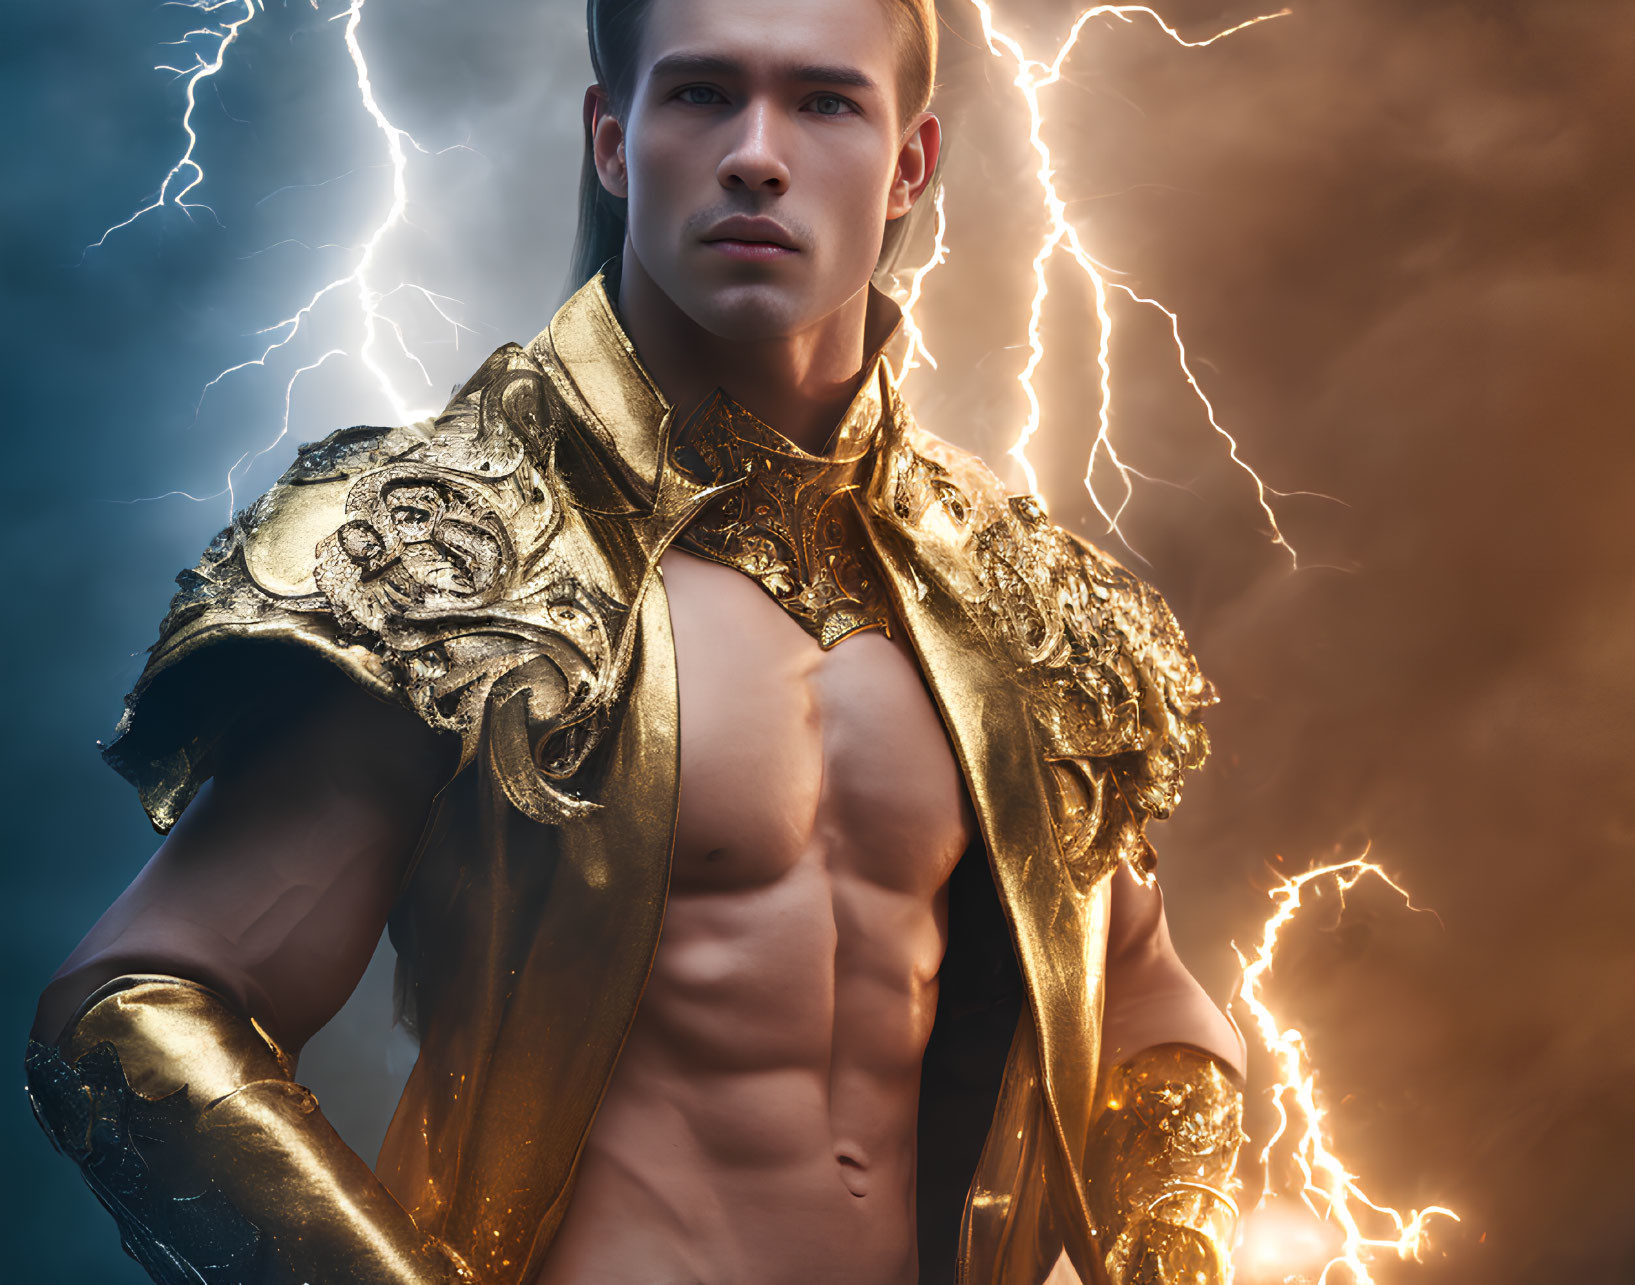 Muscular man in golden shoulder armor under dramatic sky with lightning bolts